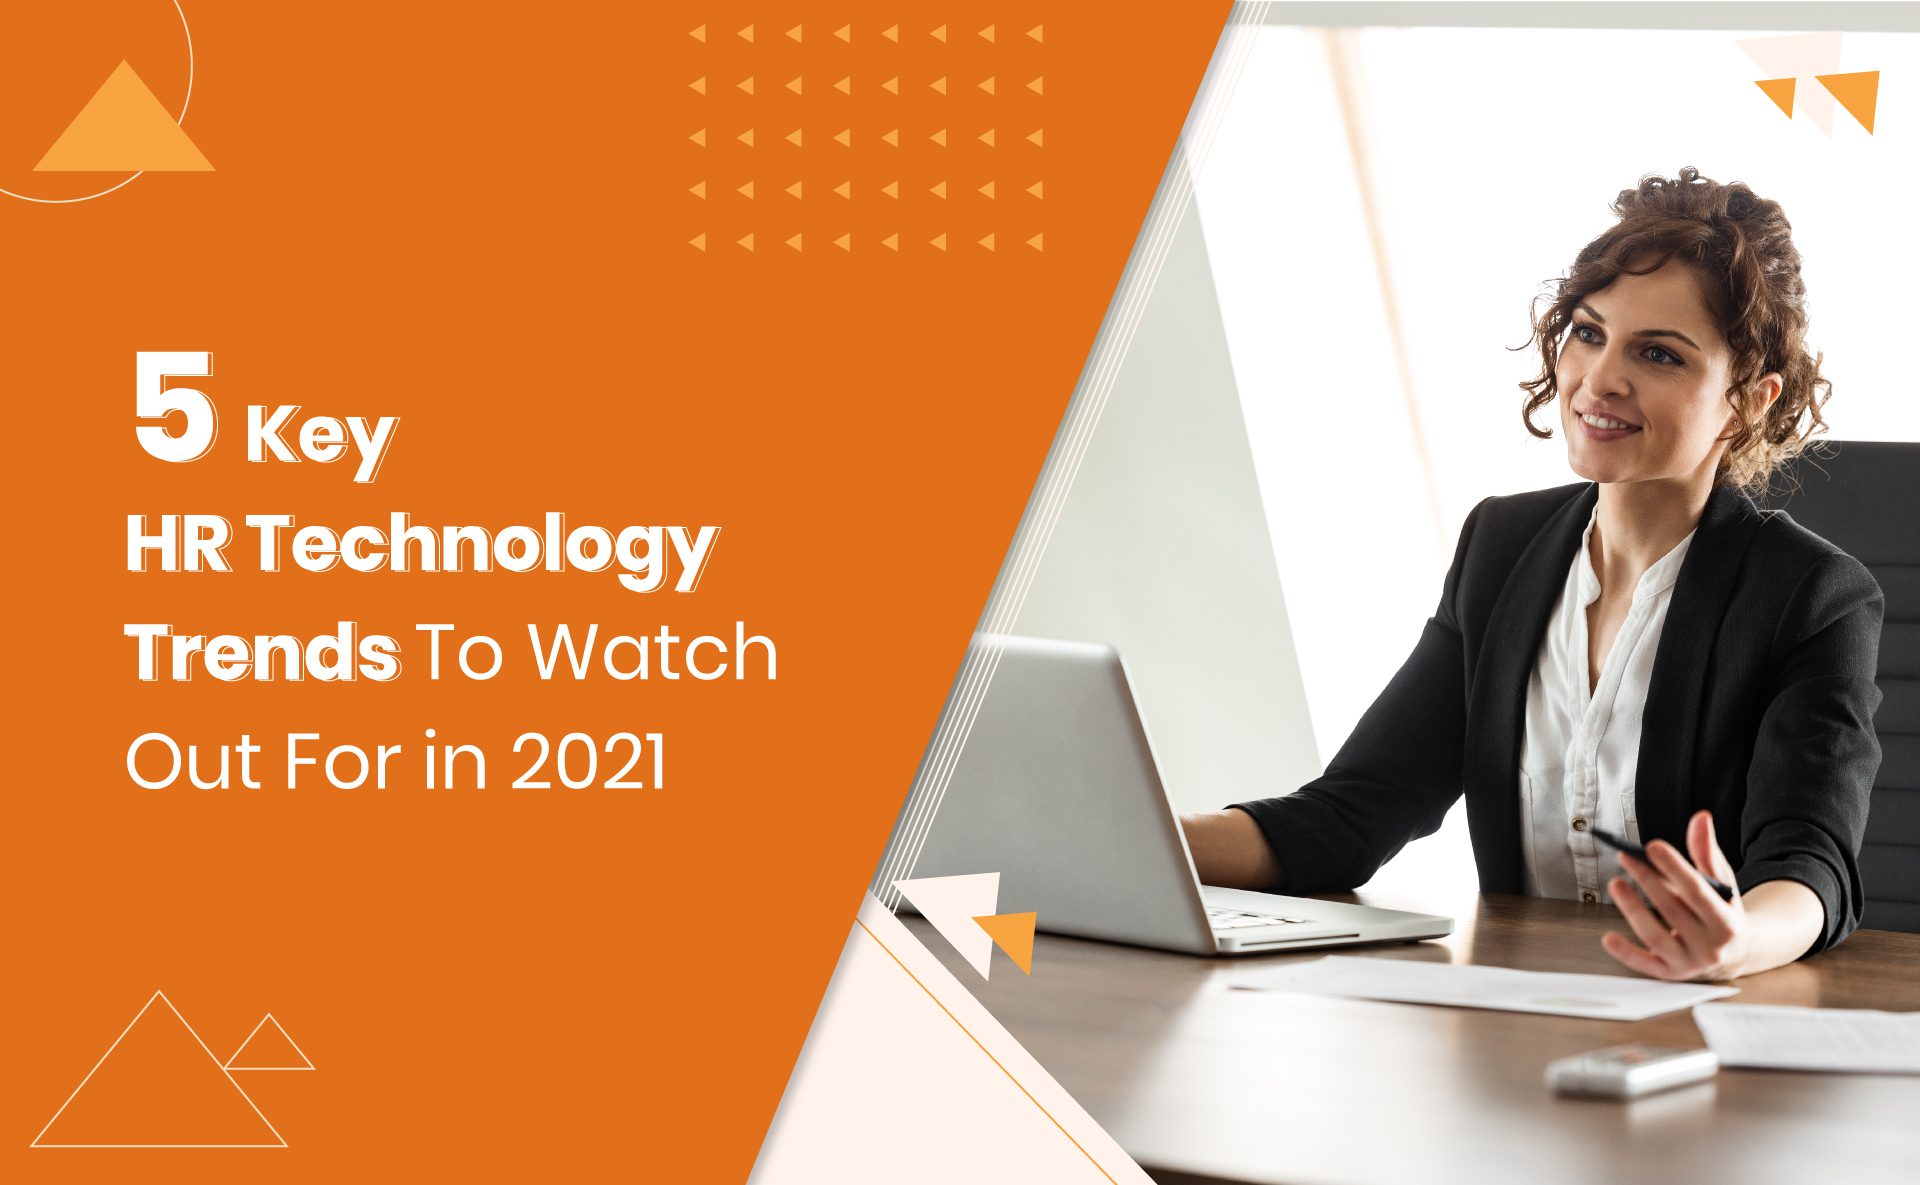 5 Emerging HR Technology Trends To Watch in 2021